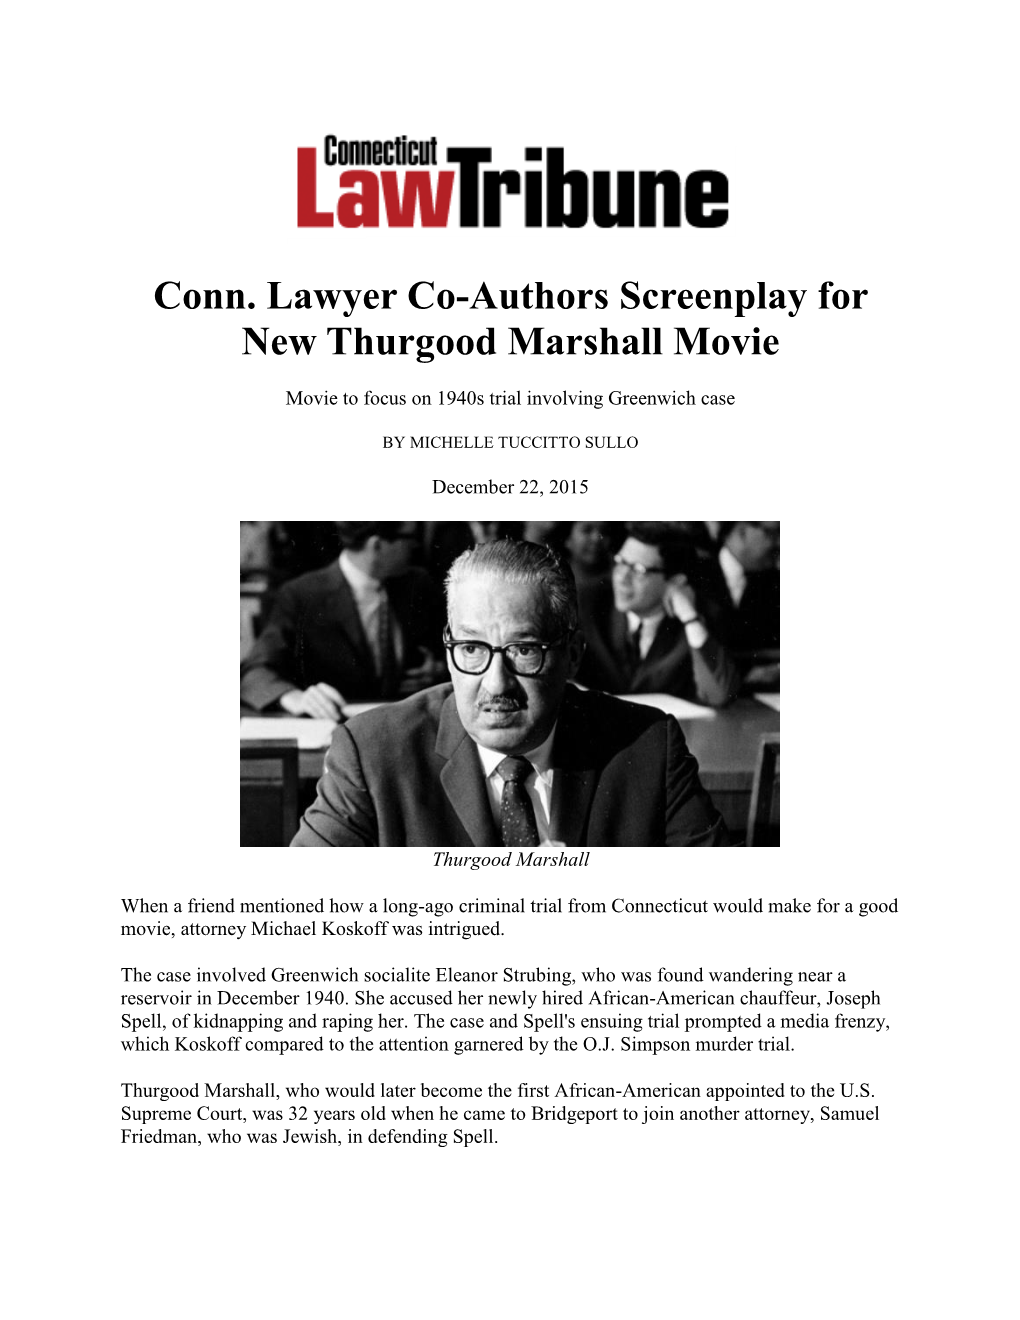 Conn. Lawyer Co-Authors Screenplay for New Thurgood Marshall Movie